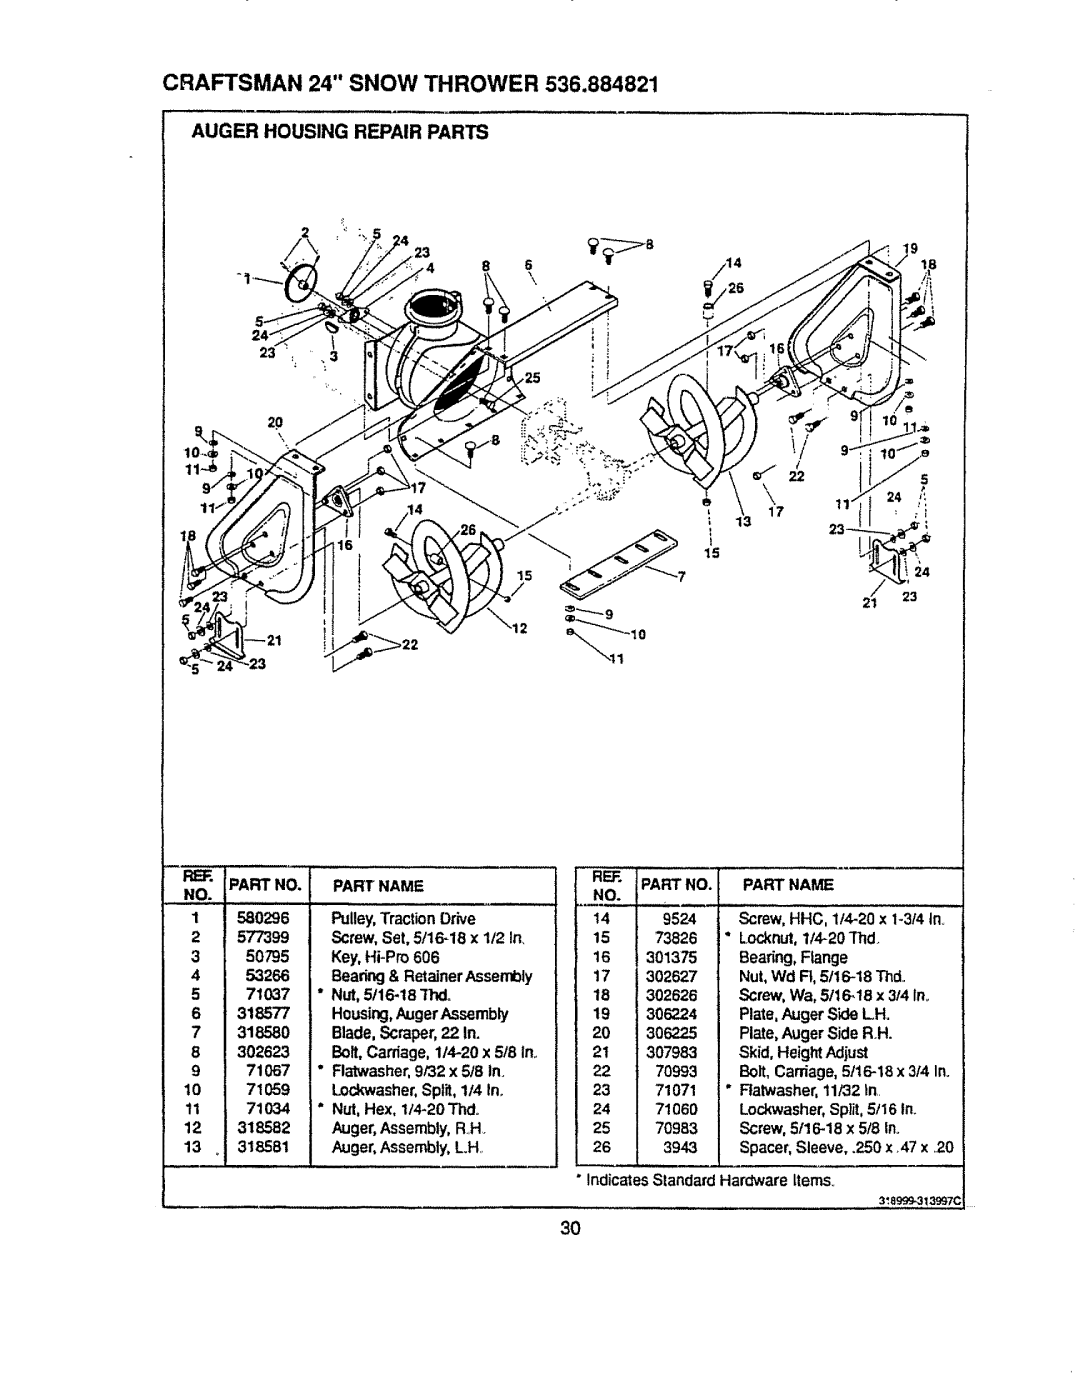 Sears 536.884821 manual A ,01, CRAFTSMAN 24 SNOW THROWER 